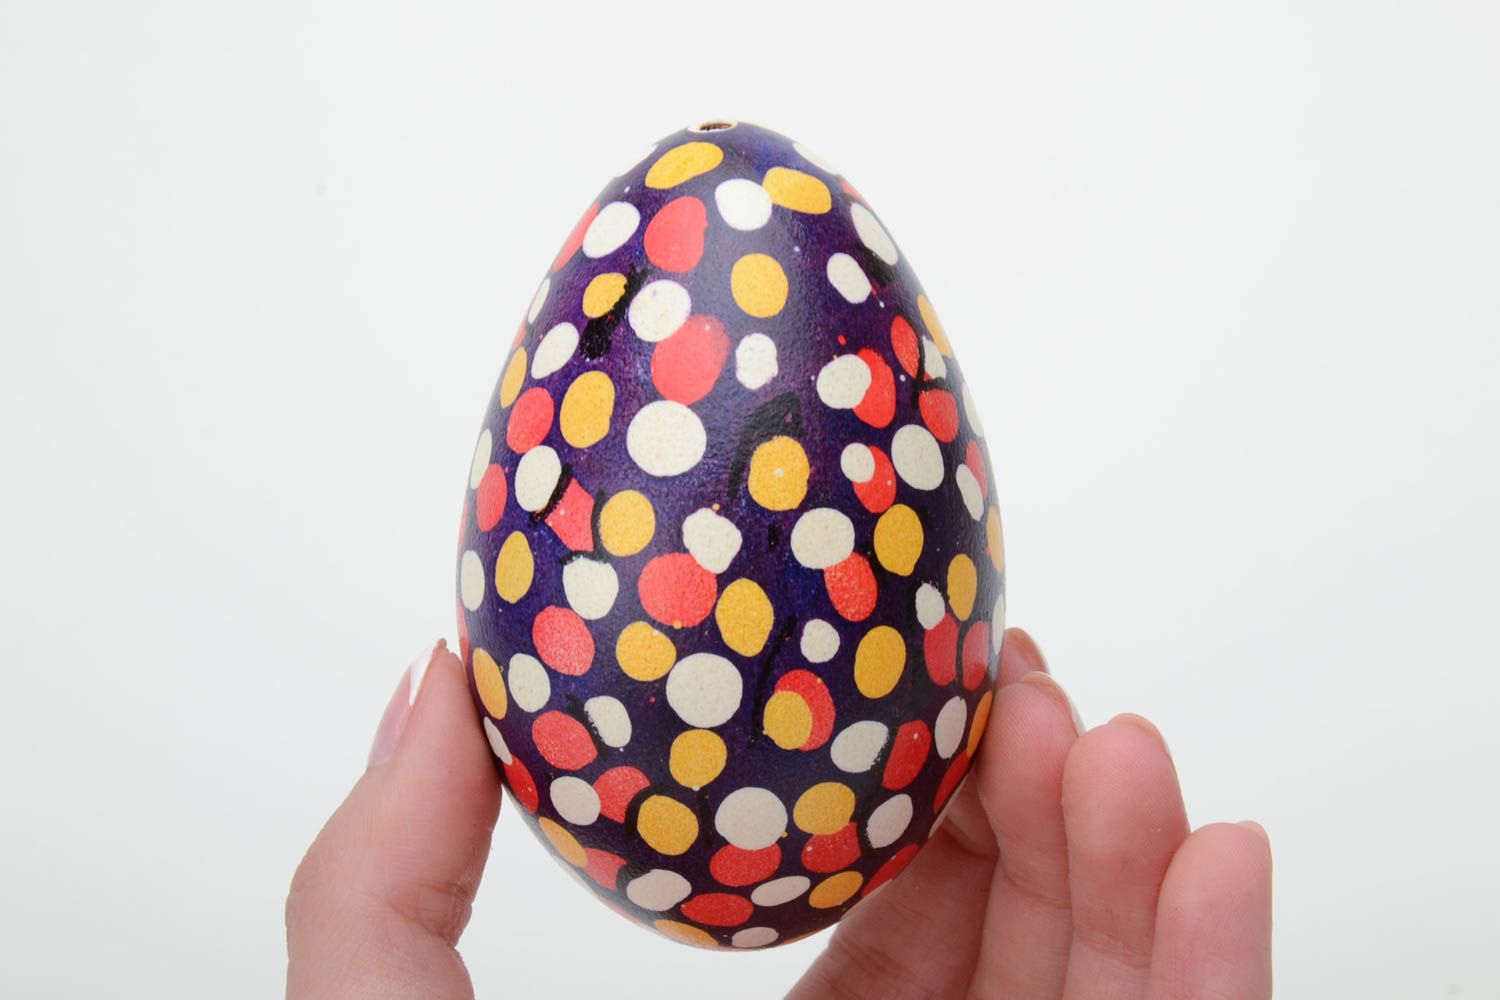 Handmade unusual Easter egg with colorful polka dot pattern on dark background photo 5